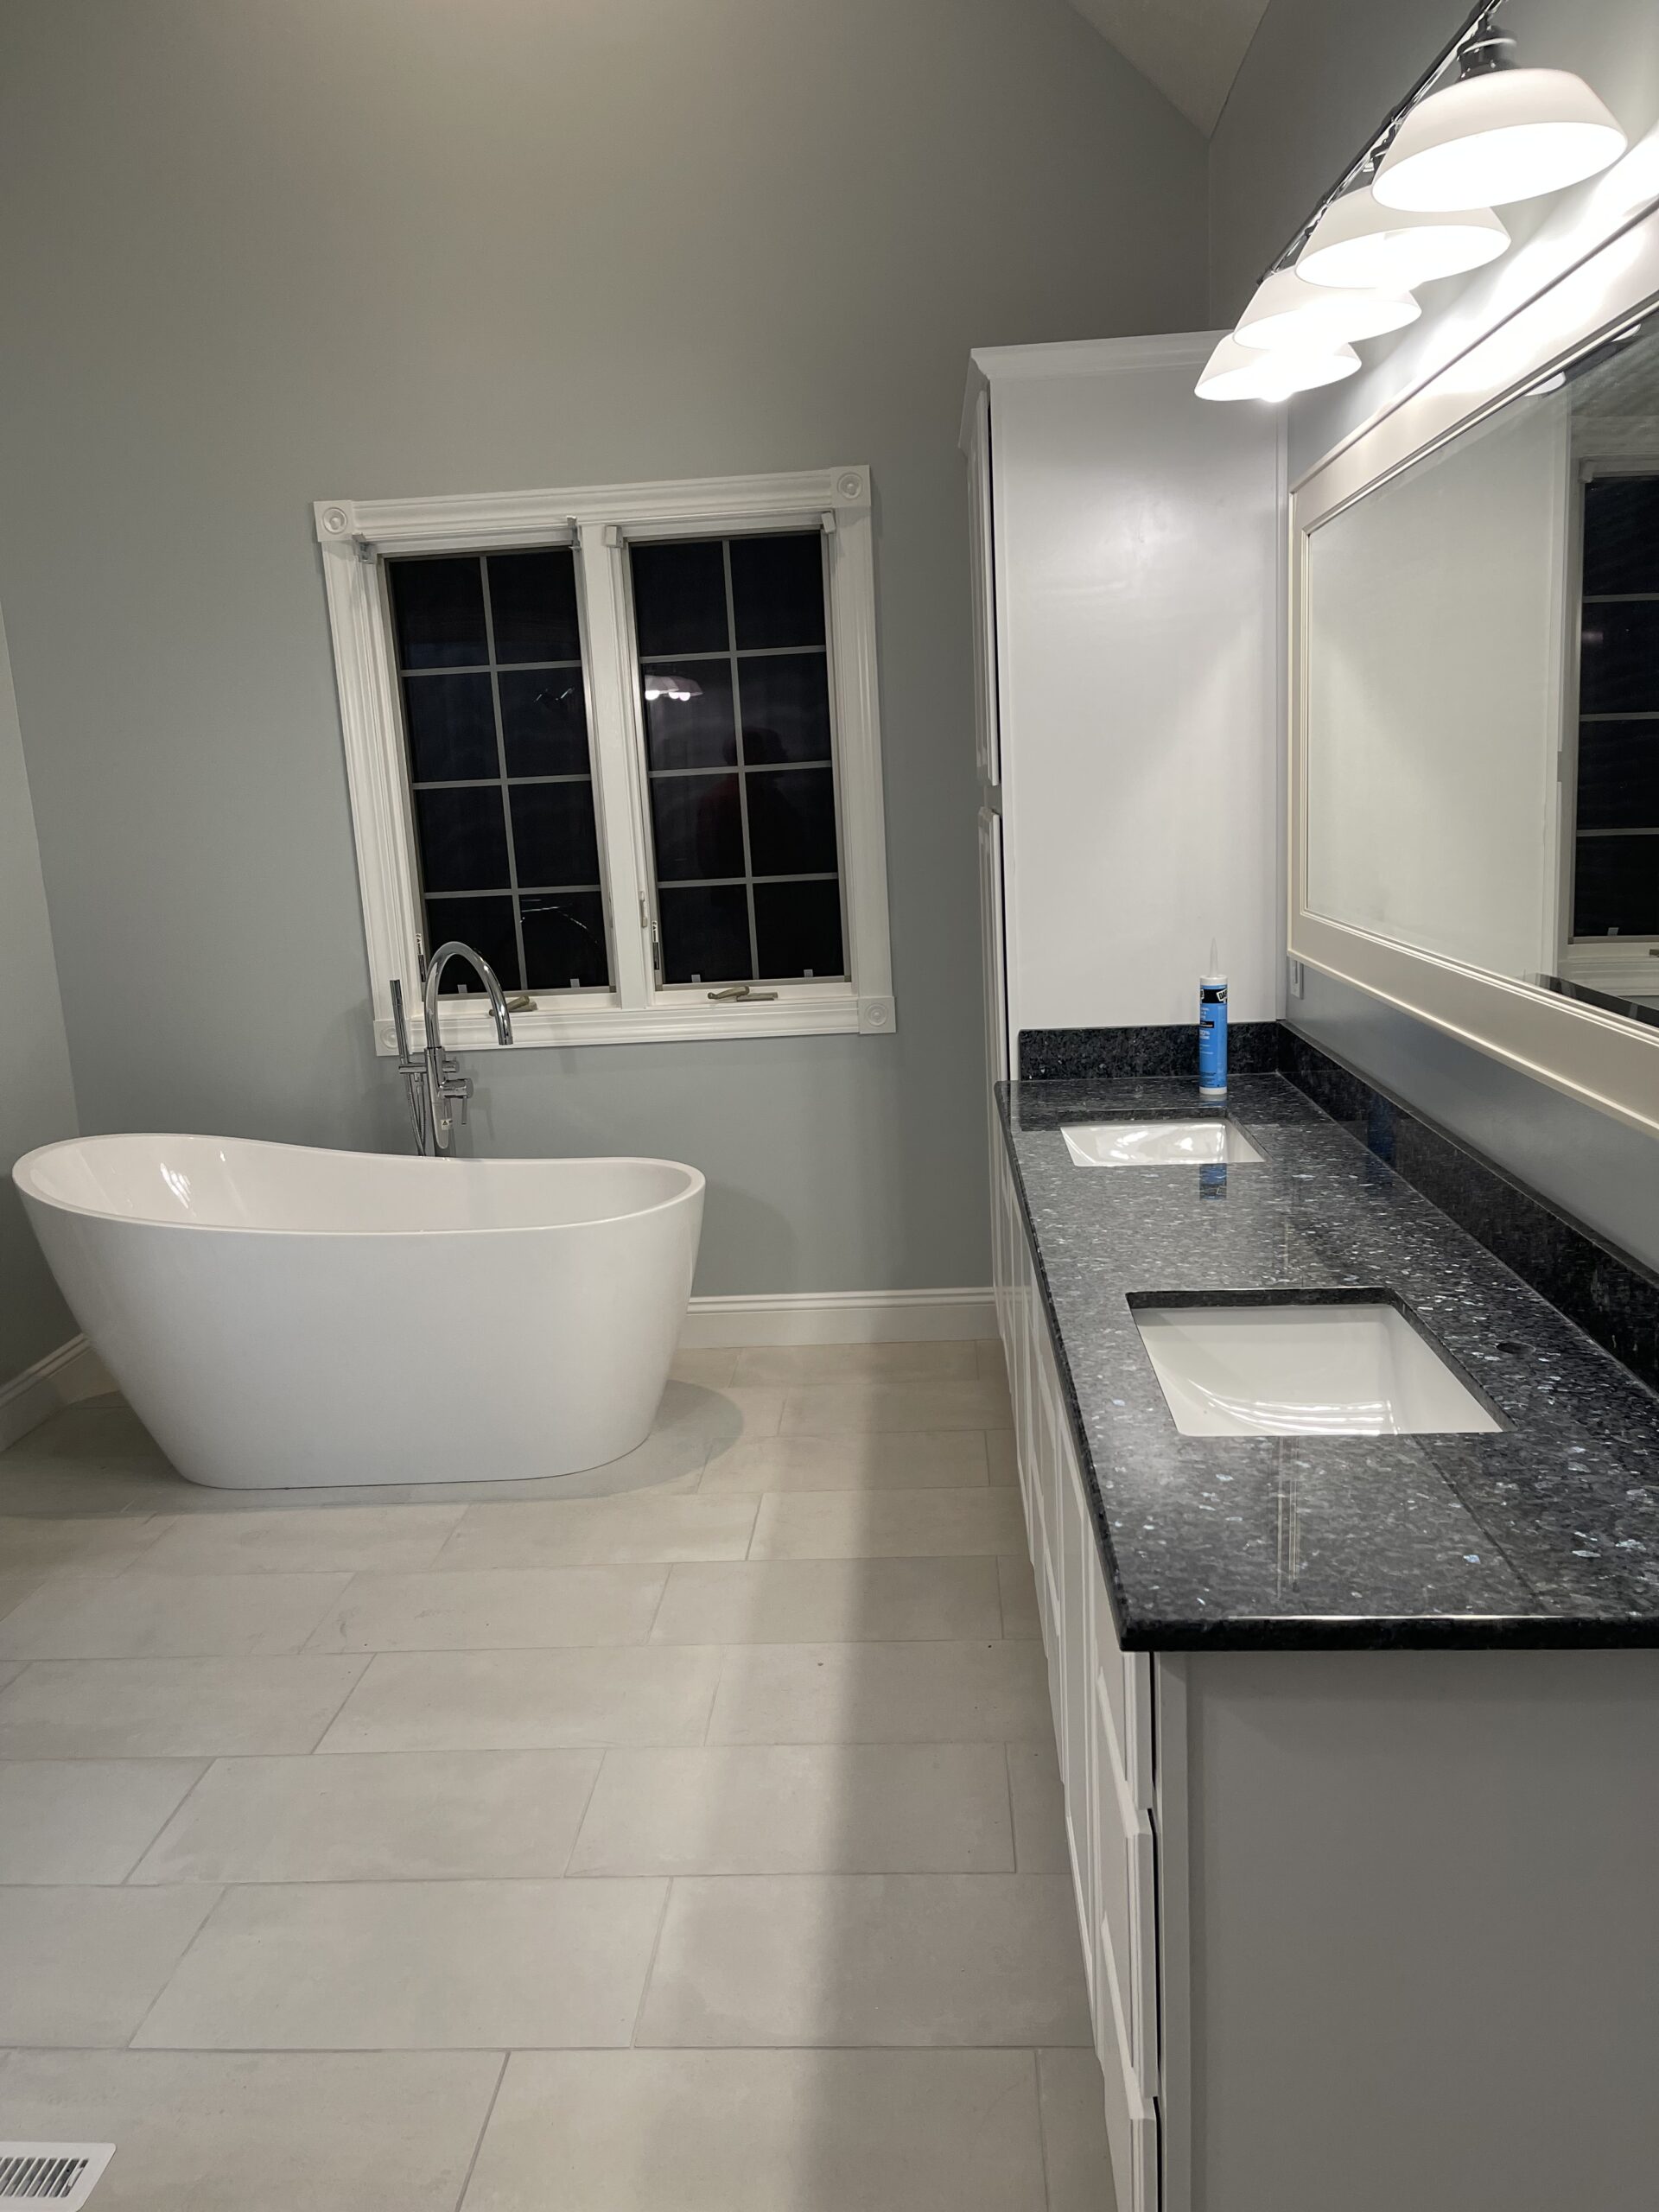 NIcassa Contruction and Remodeling offers expert bathroom remodeling services in Mentor. Upgrade your bathroom with a stand free tub and create the space of your dreams.